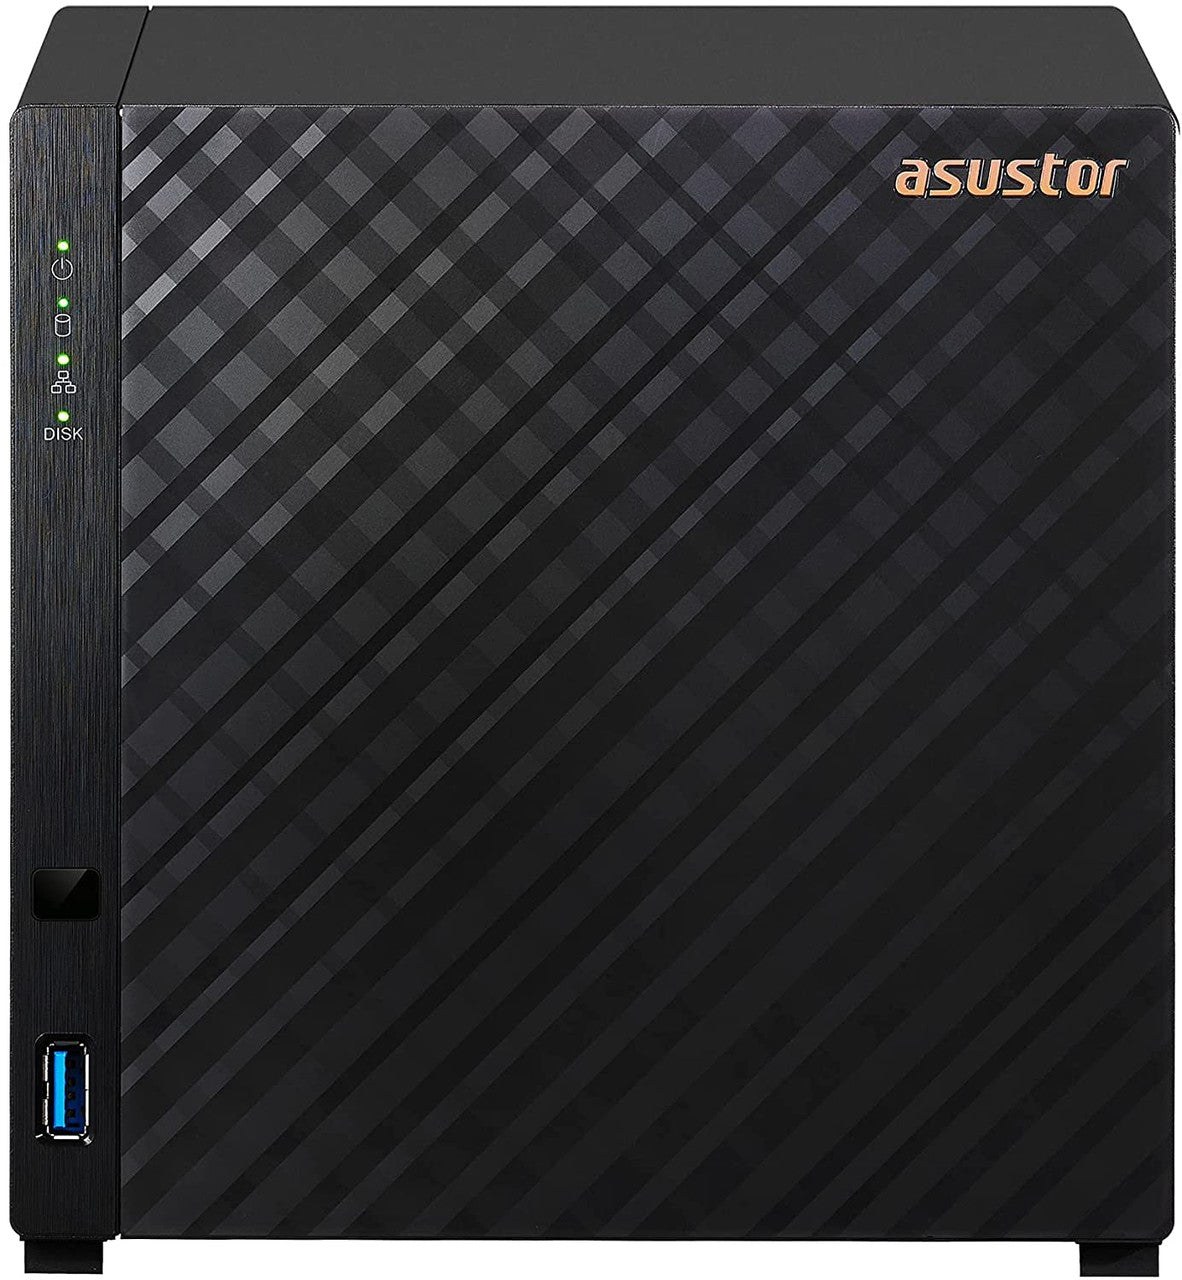 Asustor AS1104T 4-Bay Drivestor 4 NAS with 1GB RAM and 56TB (4x14TB) Western Digital RED PRO Drives